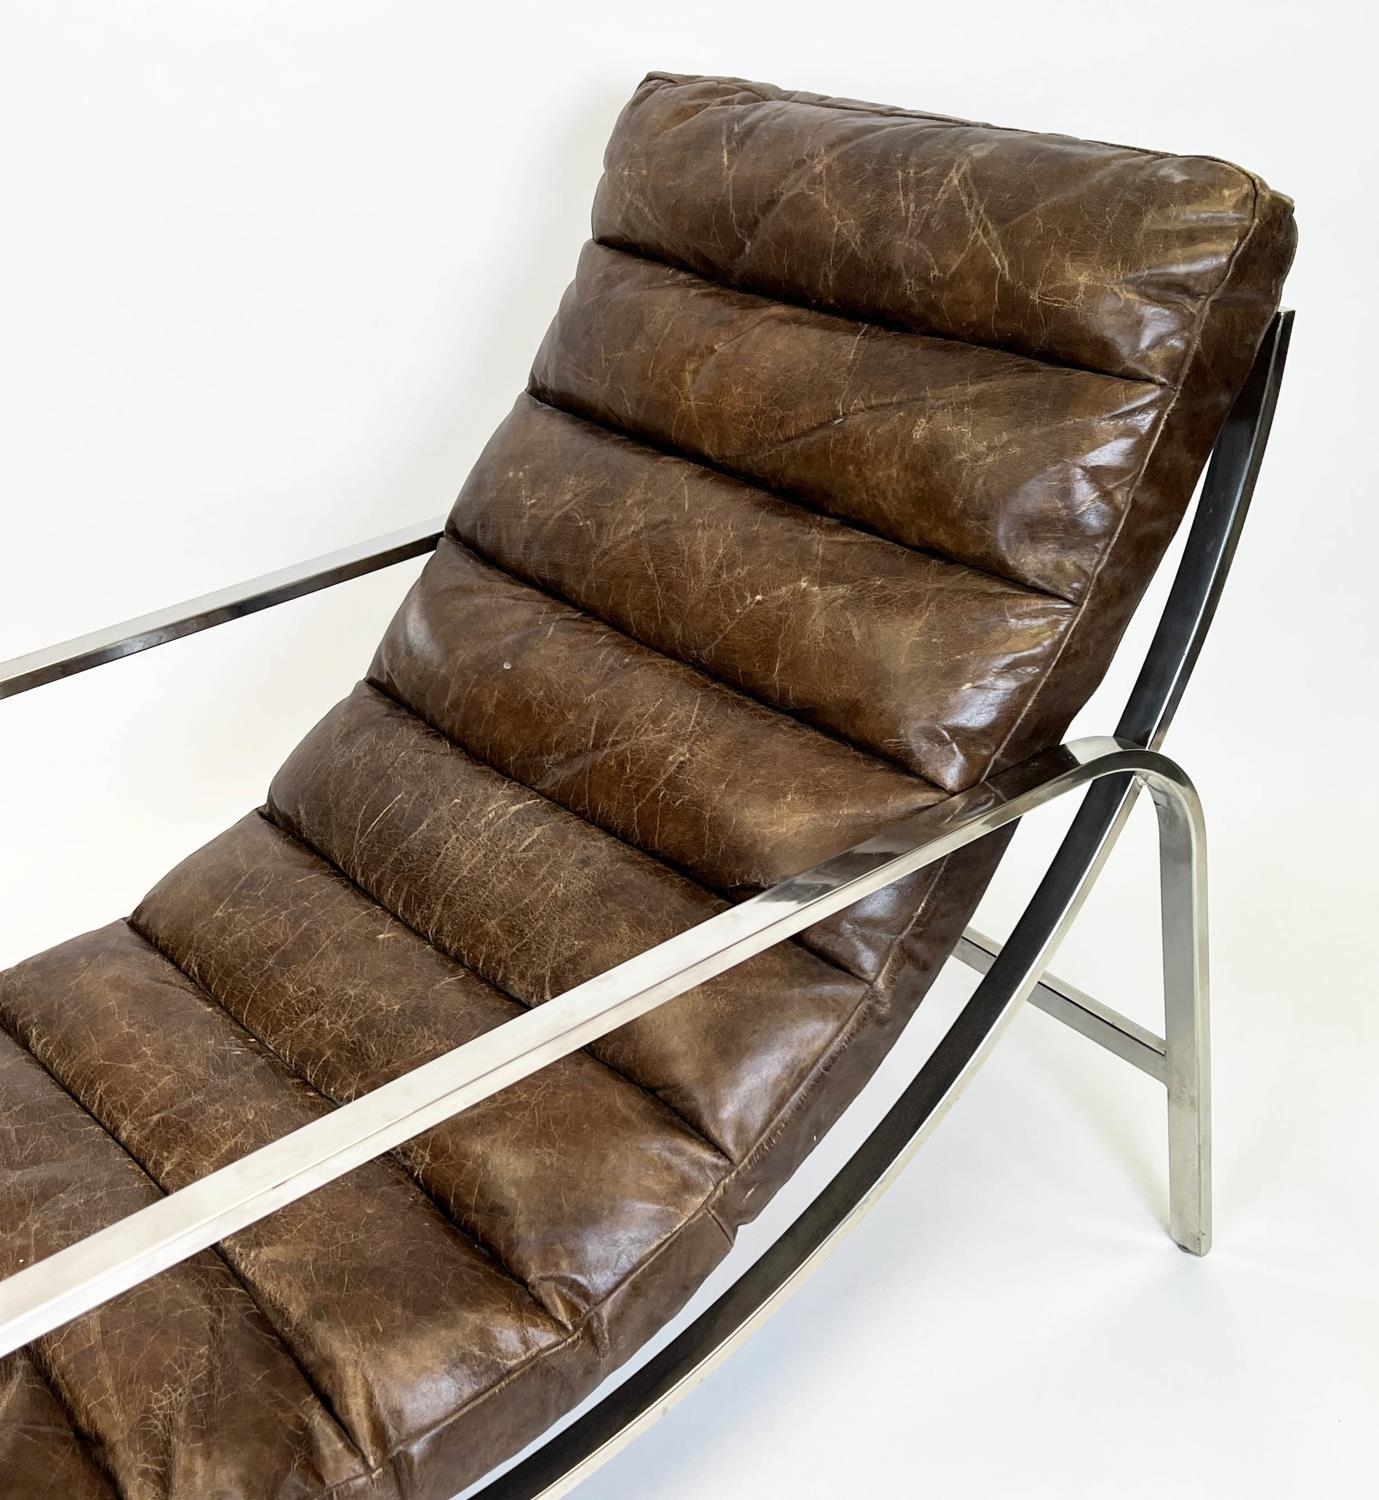 HALO SCOTT ARMCHAIR, ribbed brown leather with a stainless steel frame, 84cm H x 110cm x 63cm. - Image 3 of 4